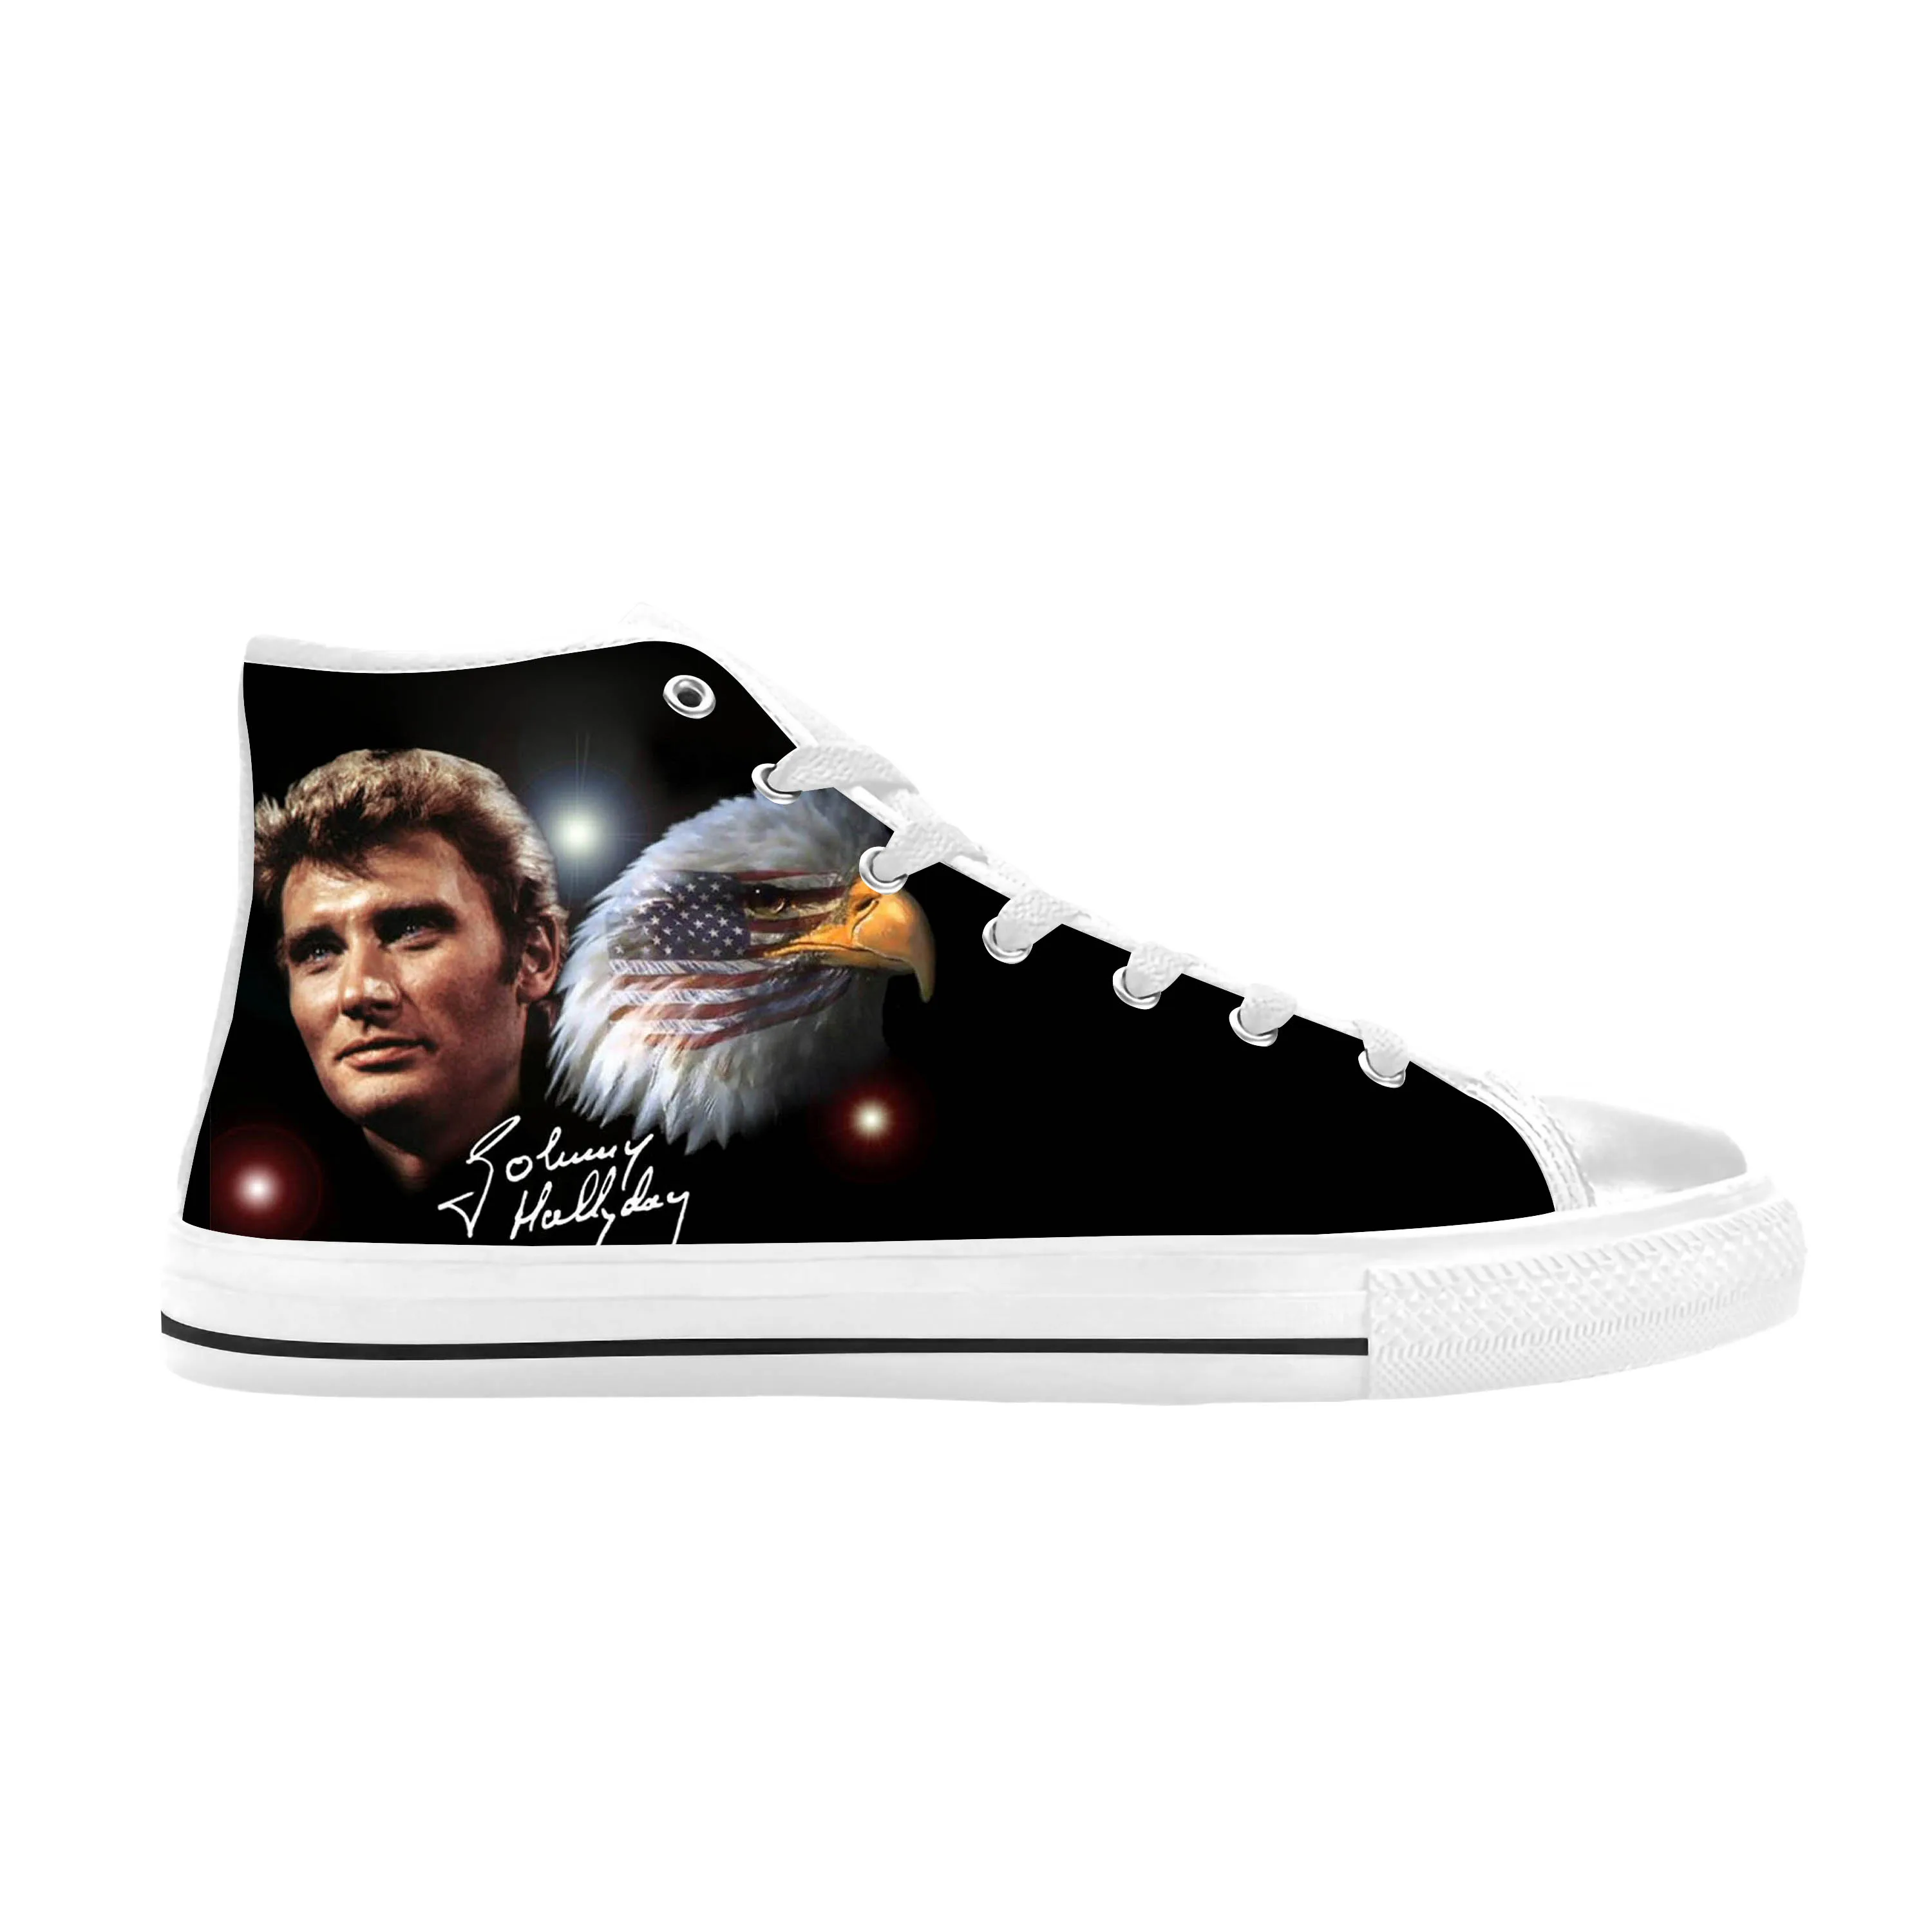 

Hot France Johnny Hallyday Rock Star Singer Music Casual Cloth Shoes High Top Comfortable Breathable 3D Print Men Women Sneakers